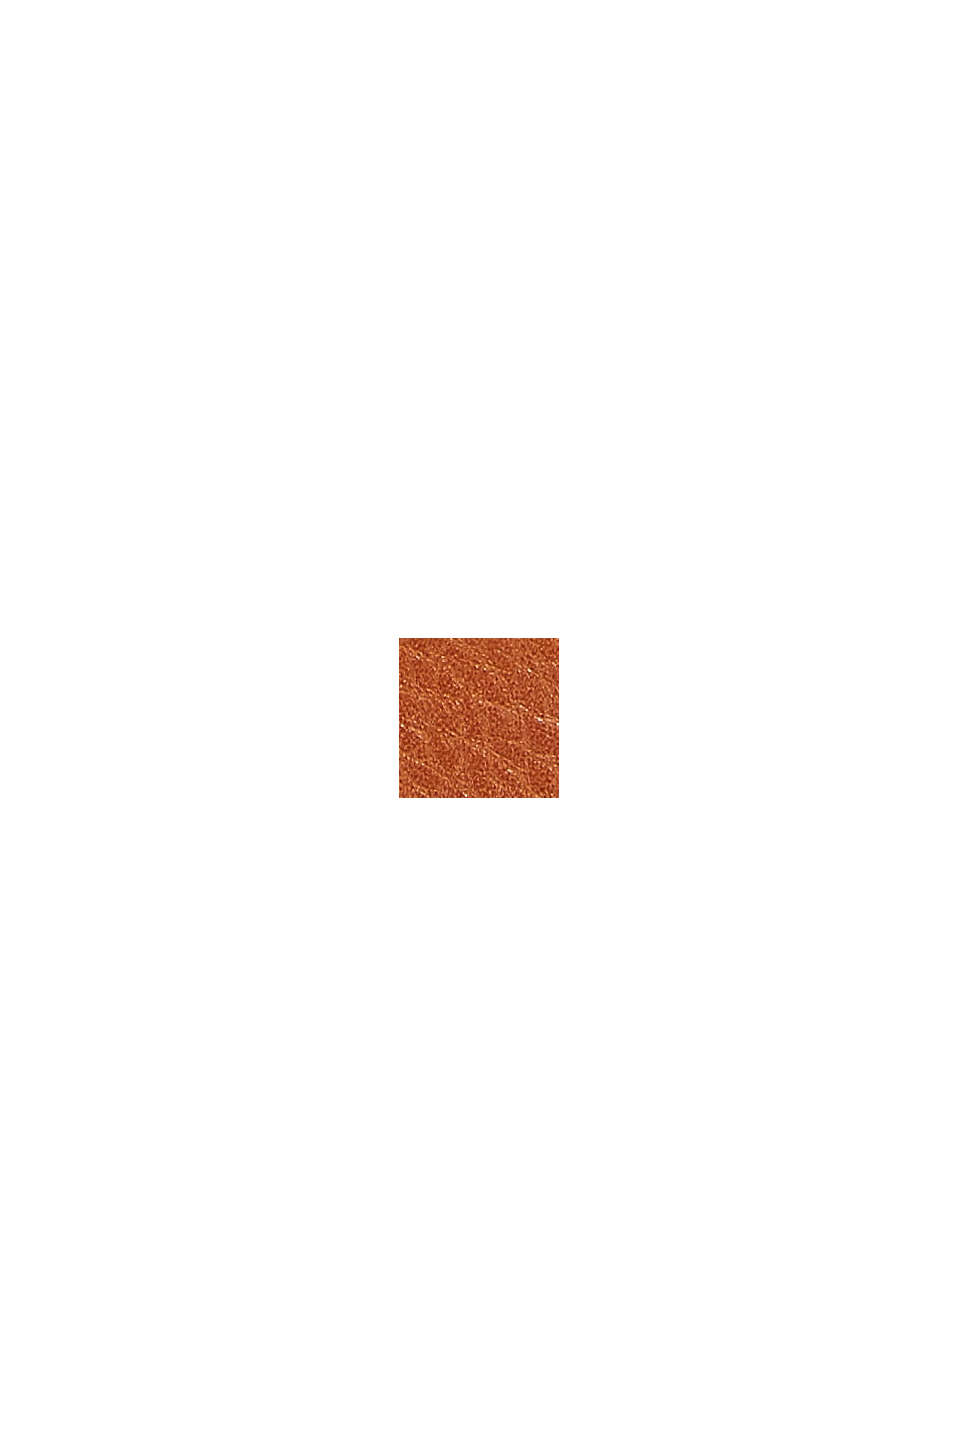 Faux leather purse, RUST BROWN, swatch